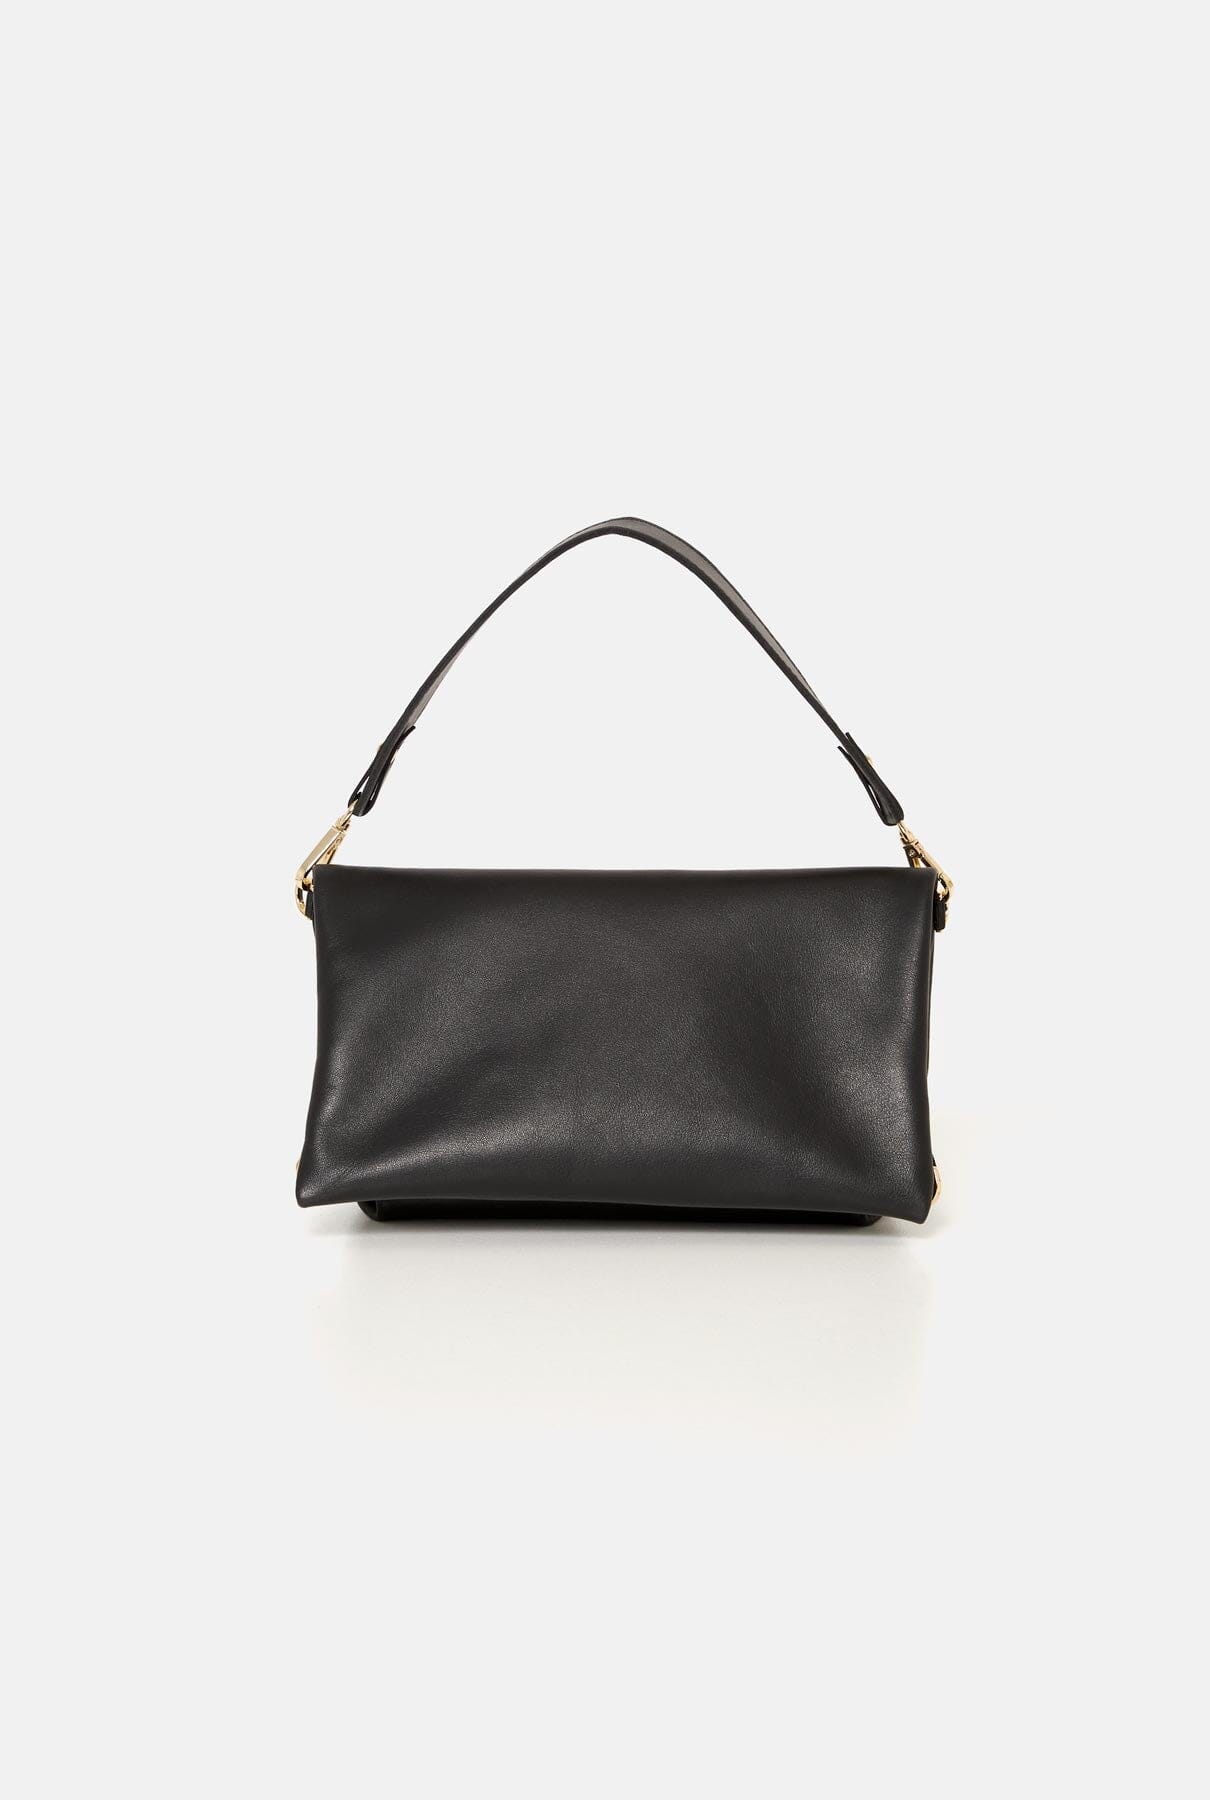 The Lucia Bag Negro Hand bags The Bag Lab 